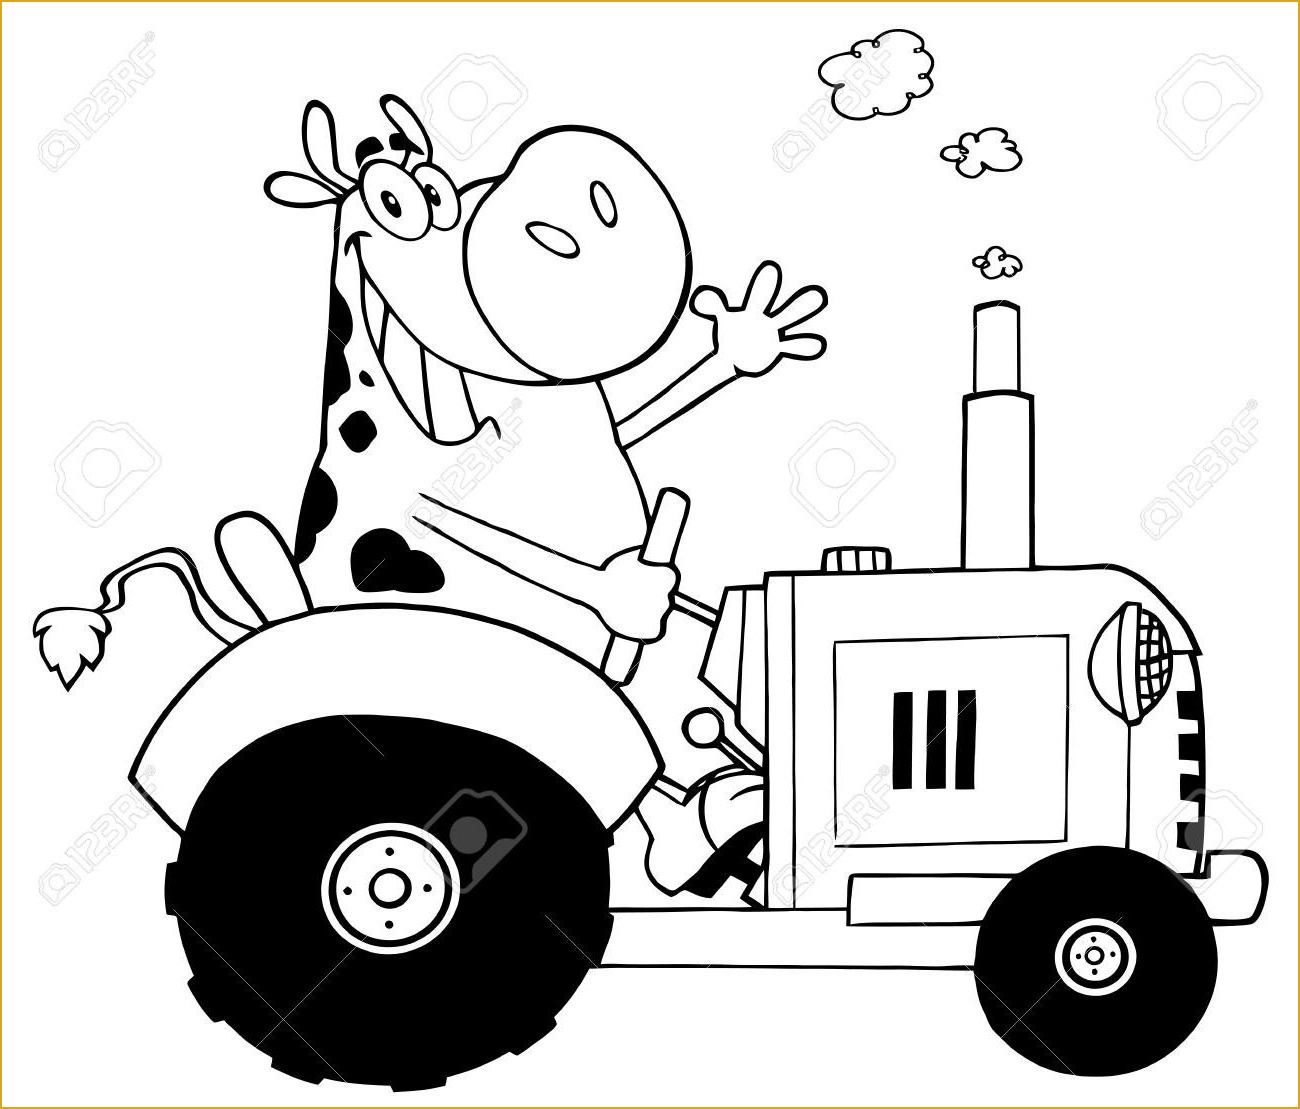 coloriage tracteur new holland facile coloriage tracteur new holland a imprimer dessins gratuits